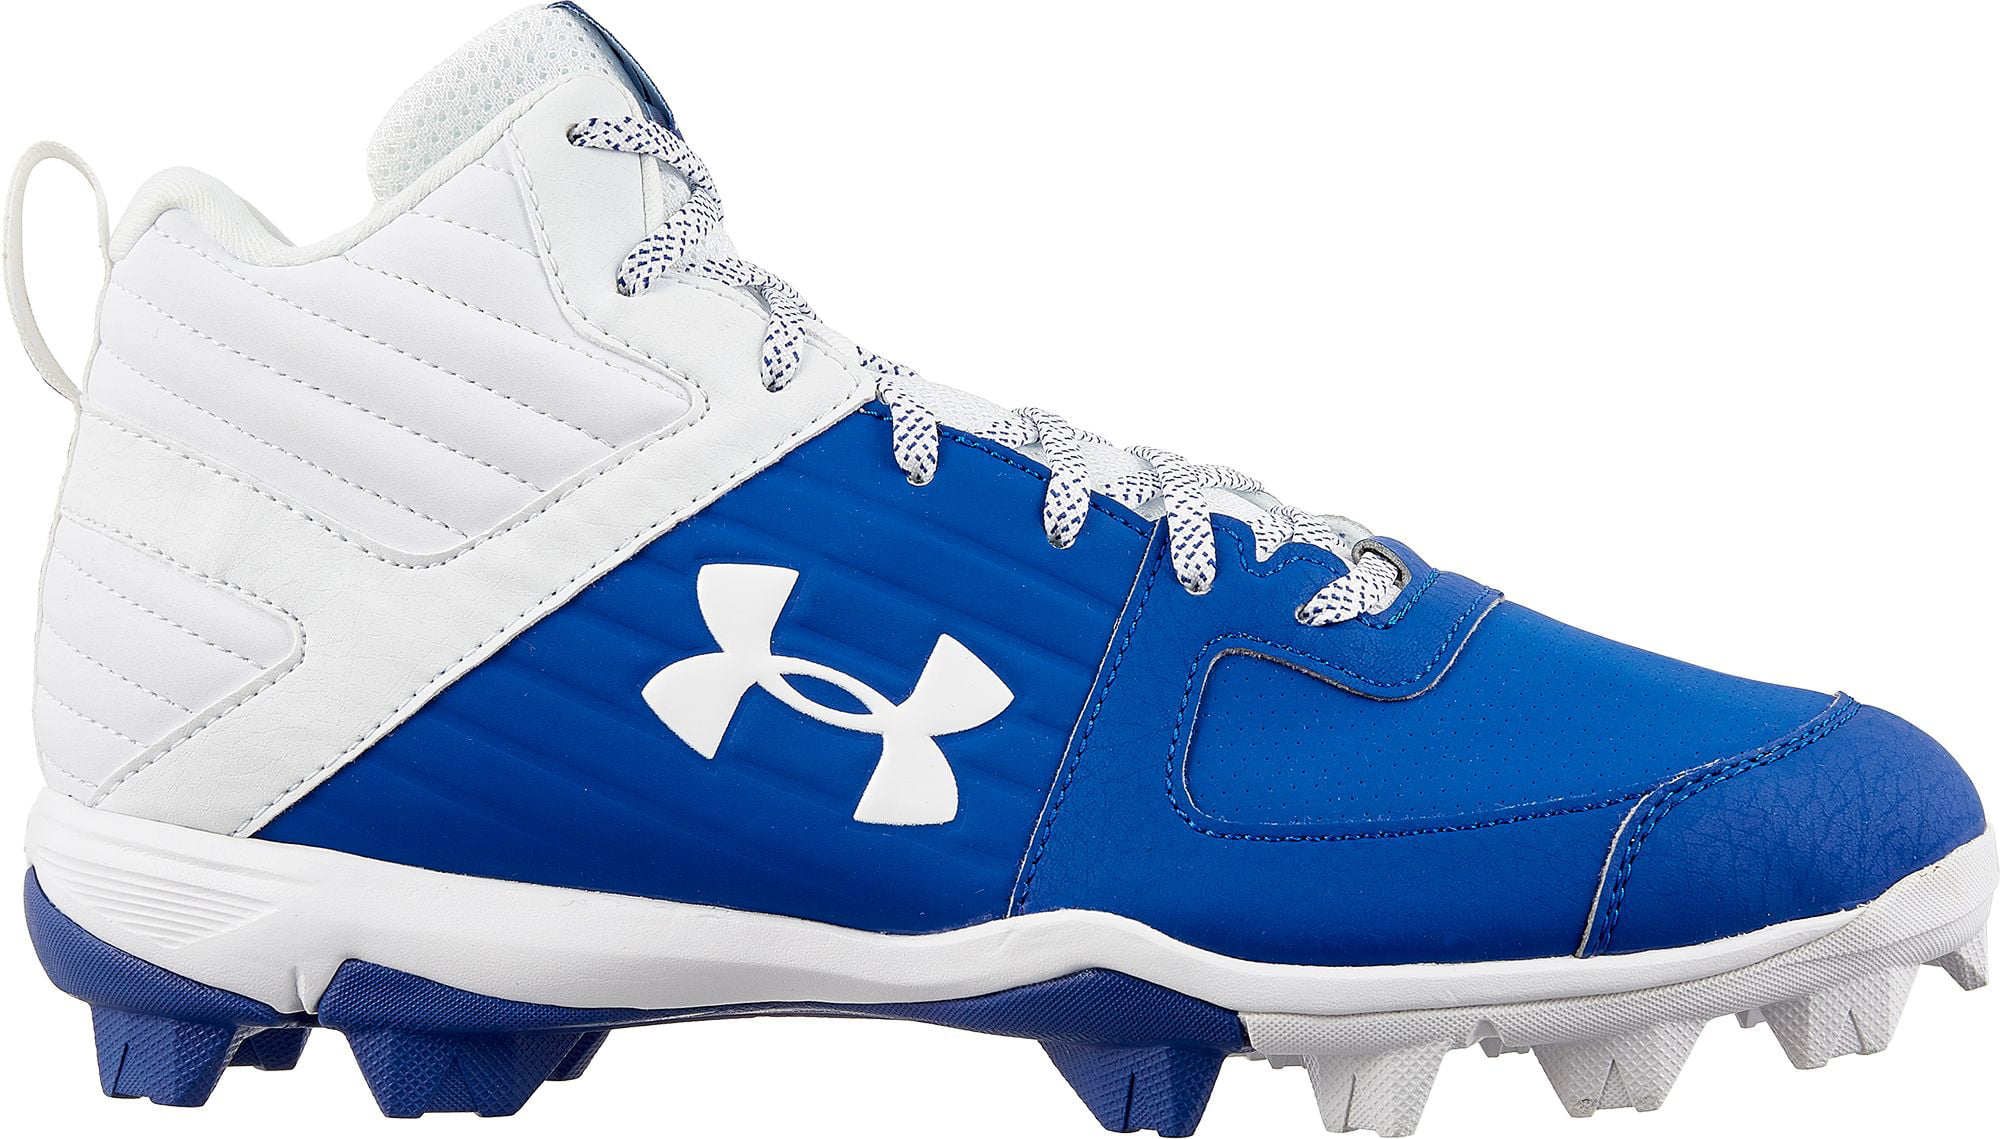 Under Armour Men's Leadoff Mid Molded Baseball Cleats 